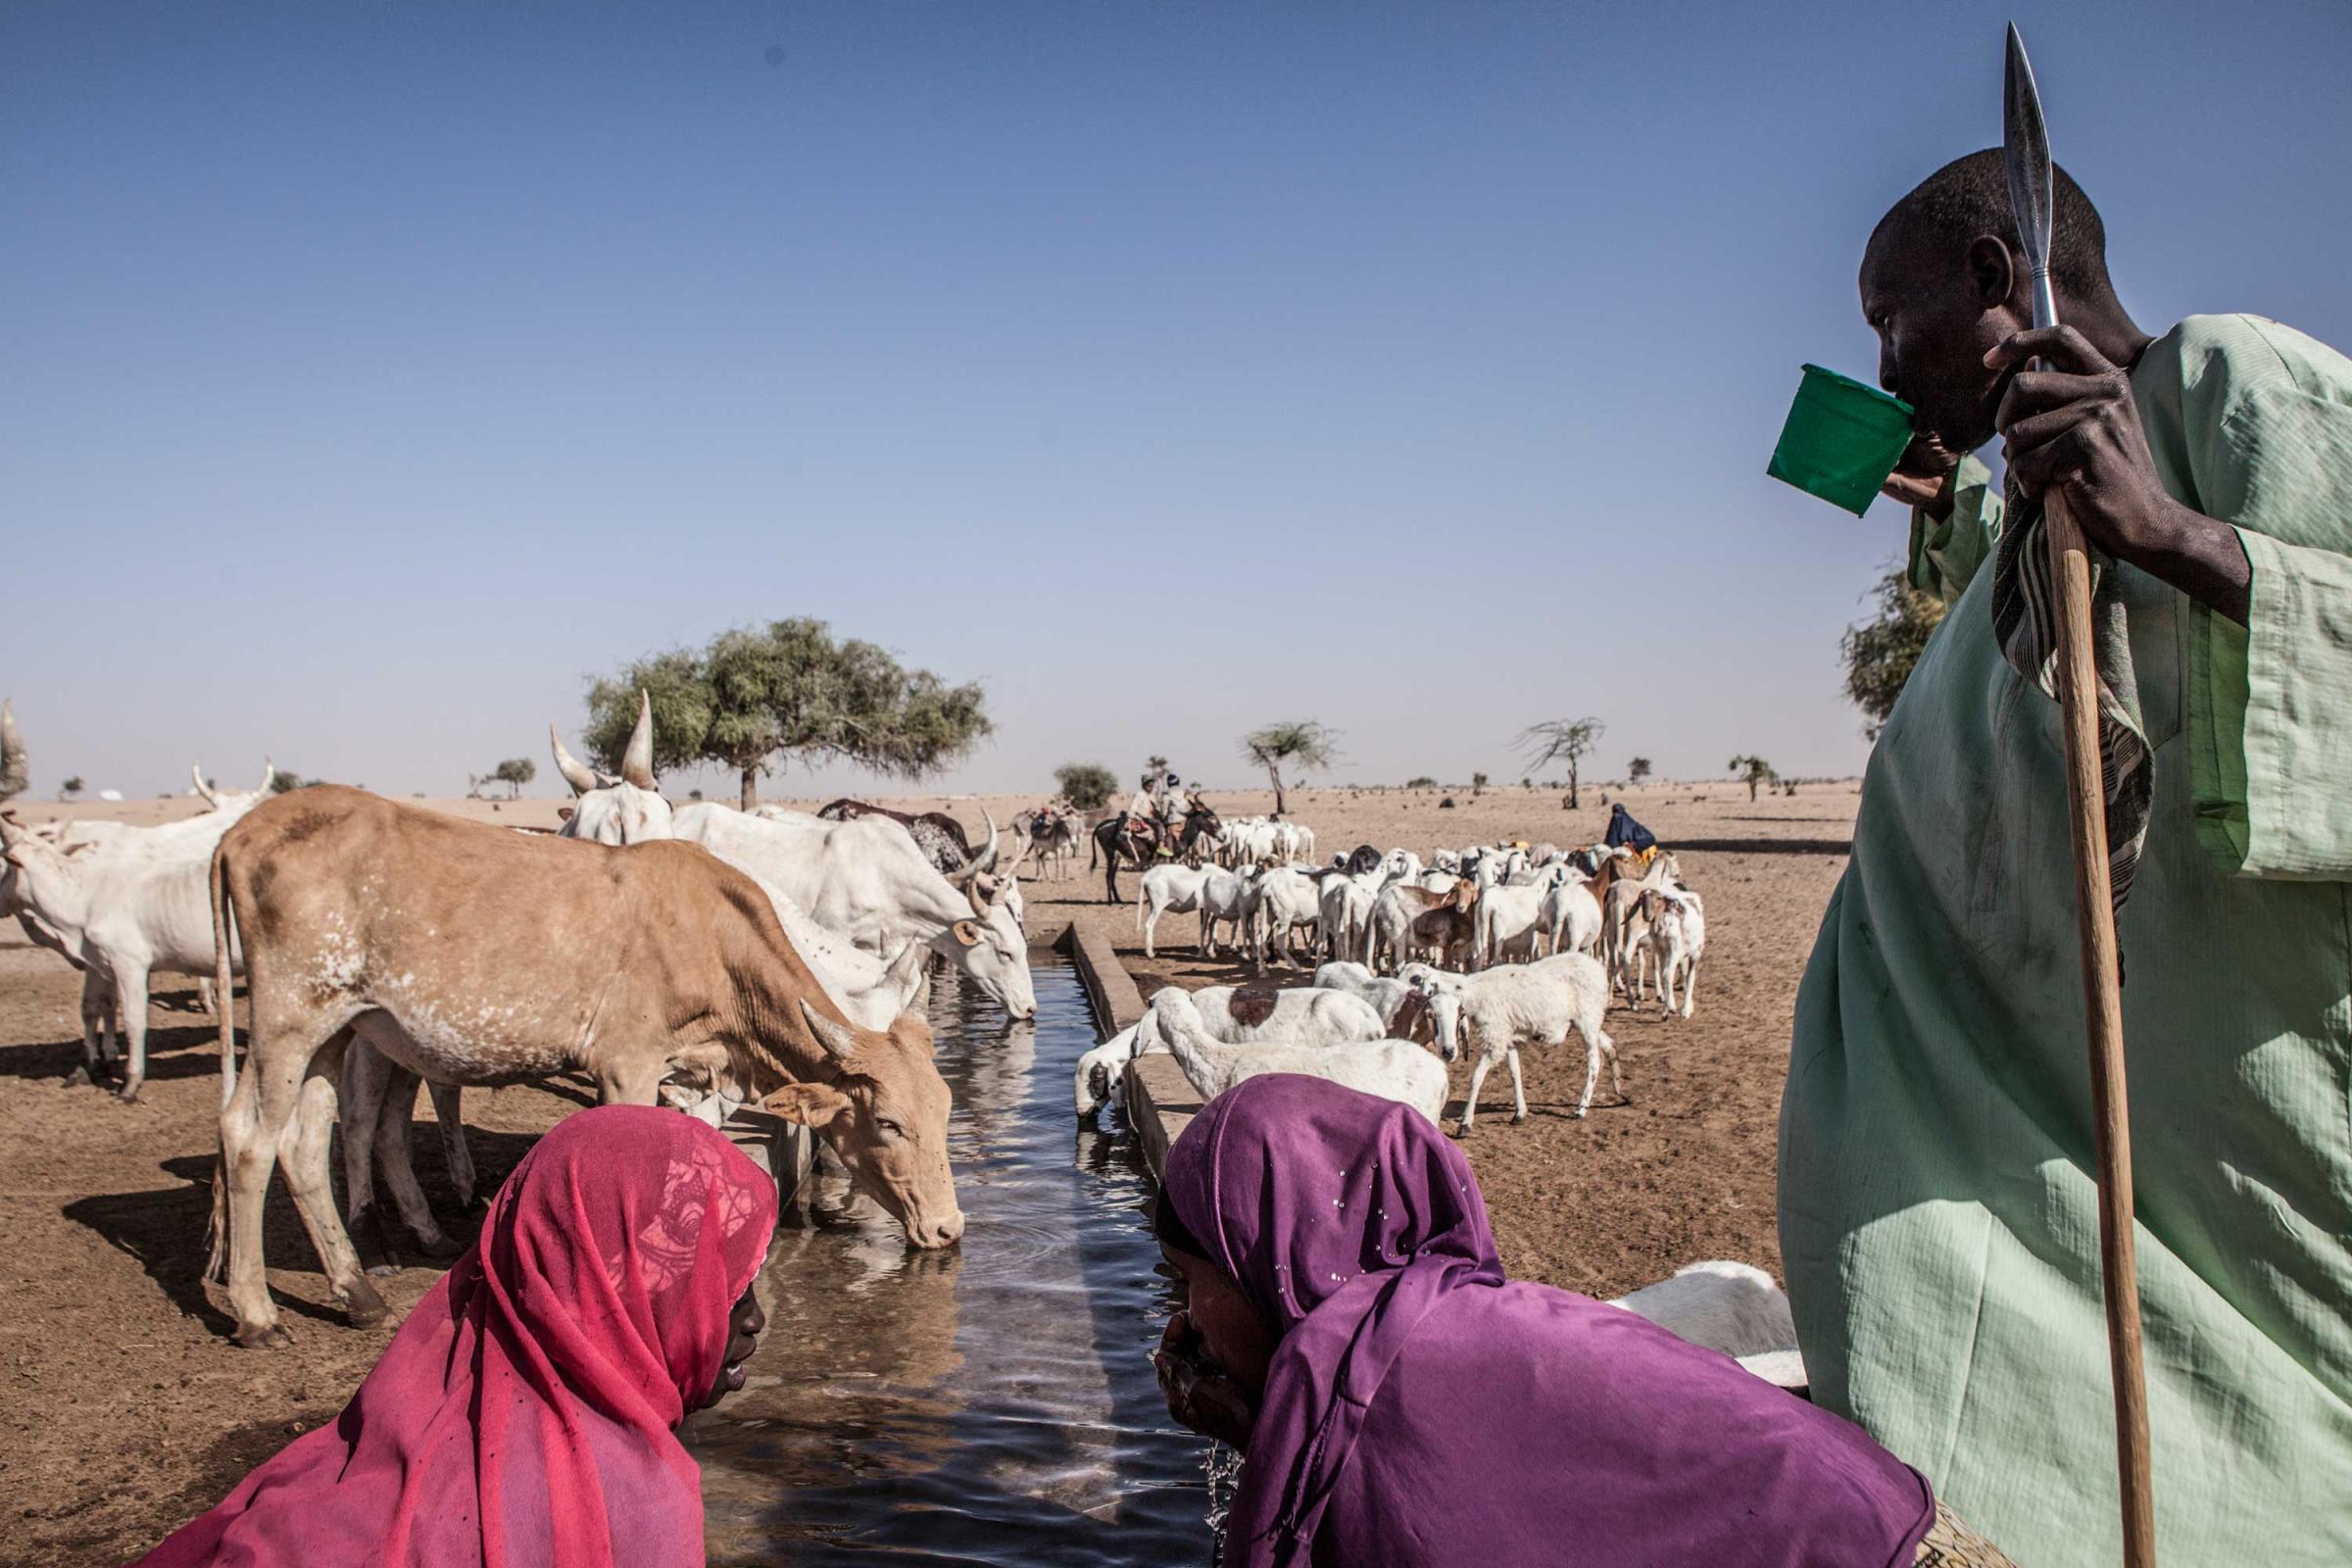 Tar Doum, 35, a herder from an island in Lake Chad, drinks water from a tap feeding a trough for animals in Kindjandi Town/Camp in Diffa, Niger. Doum farmed in addition to tending to his cows while living on the lake but after Boko Haram attacked and killed many in his village two years ago, he has yet to returned. (Jane Hahn)